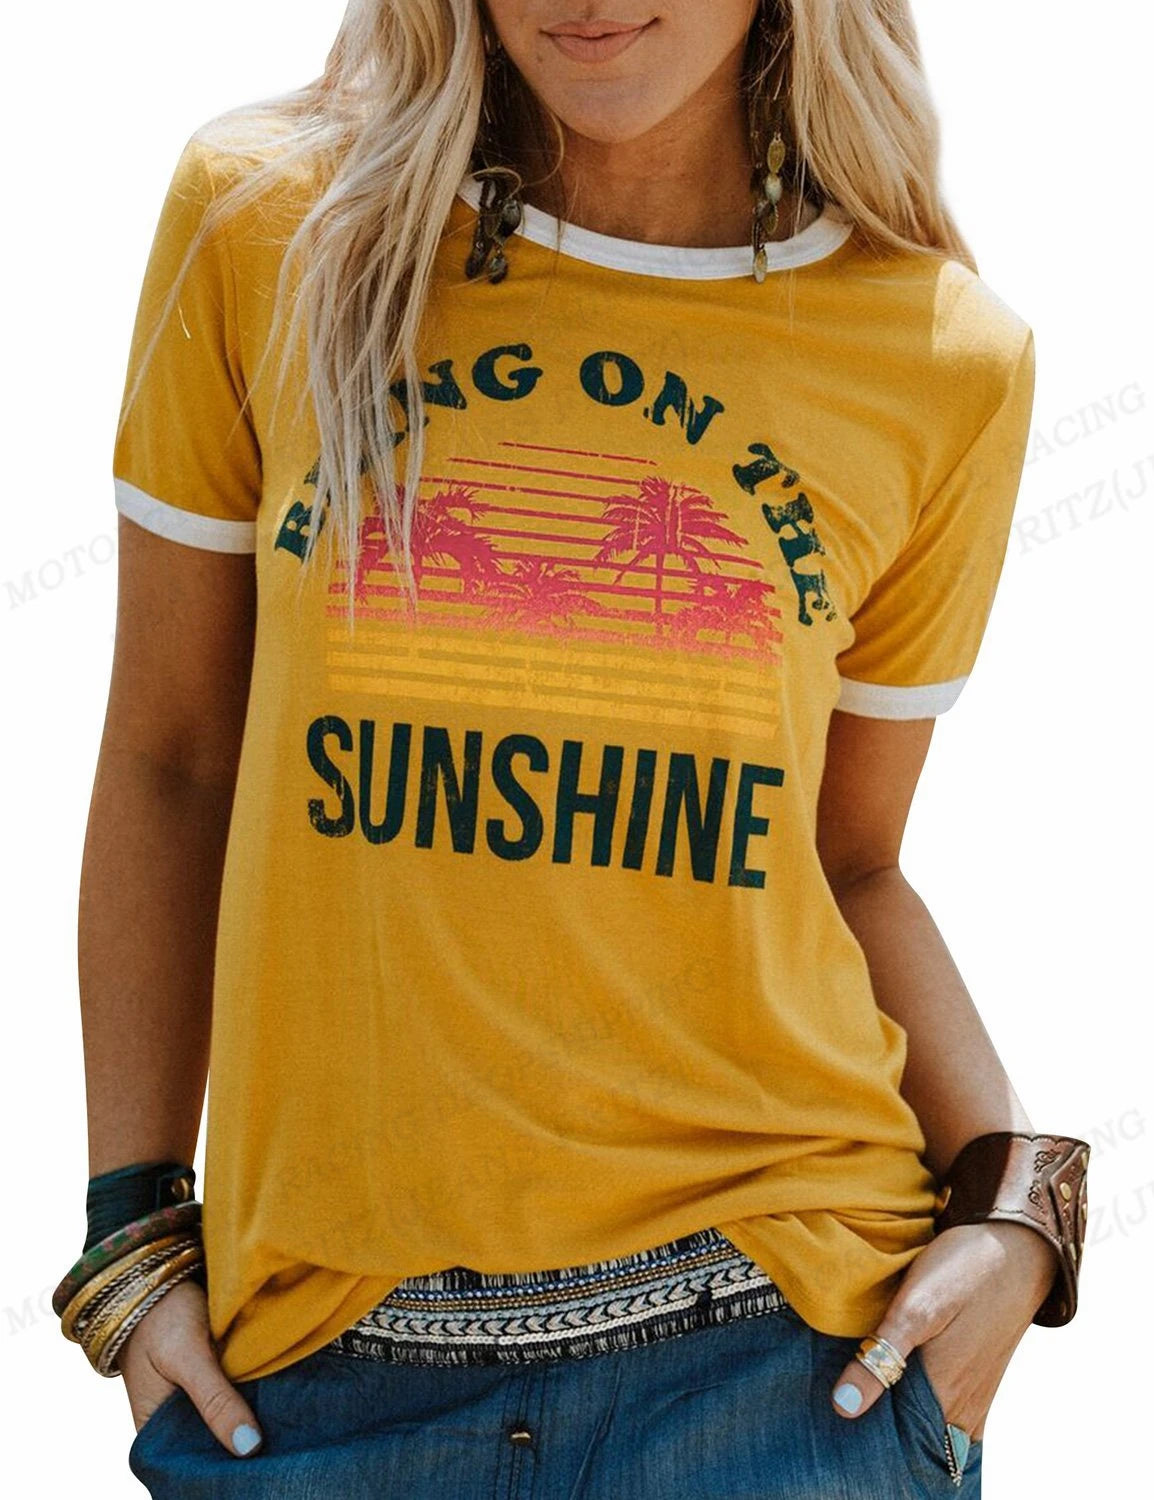 "Bring On The Sunshine" Groovy T-shirt - Trendy Summer Top